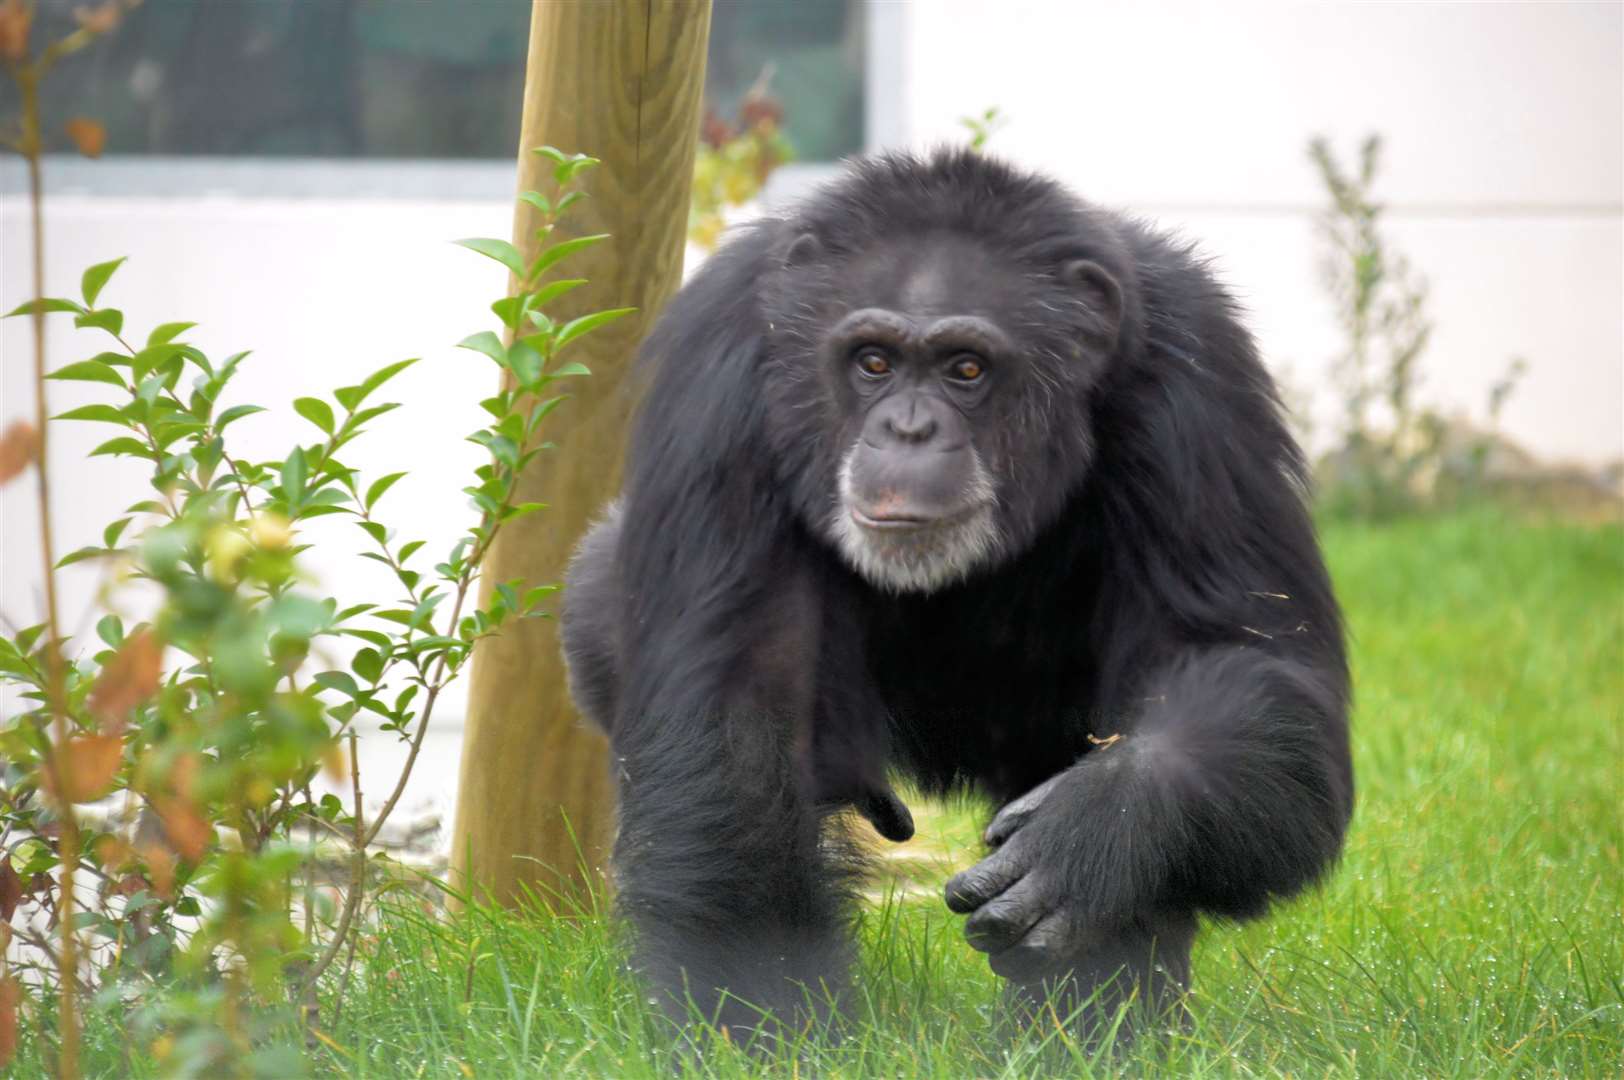 A chimp at Wingham Wildlife Park, which has today banned children's scooters, bikes and skateboards from its site